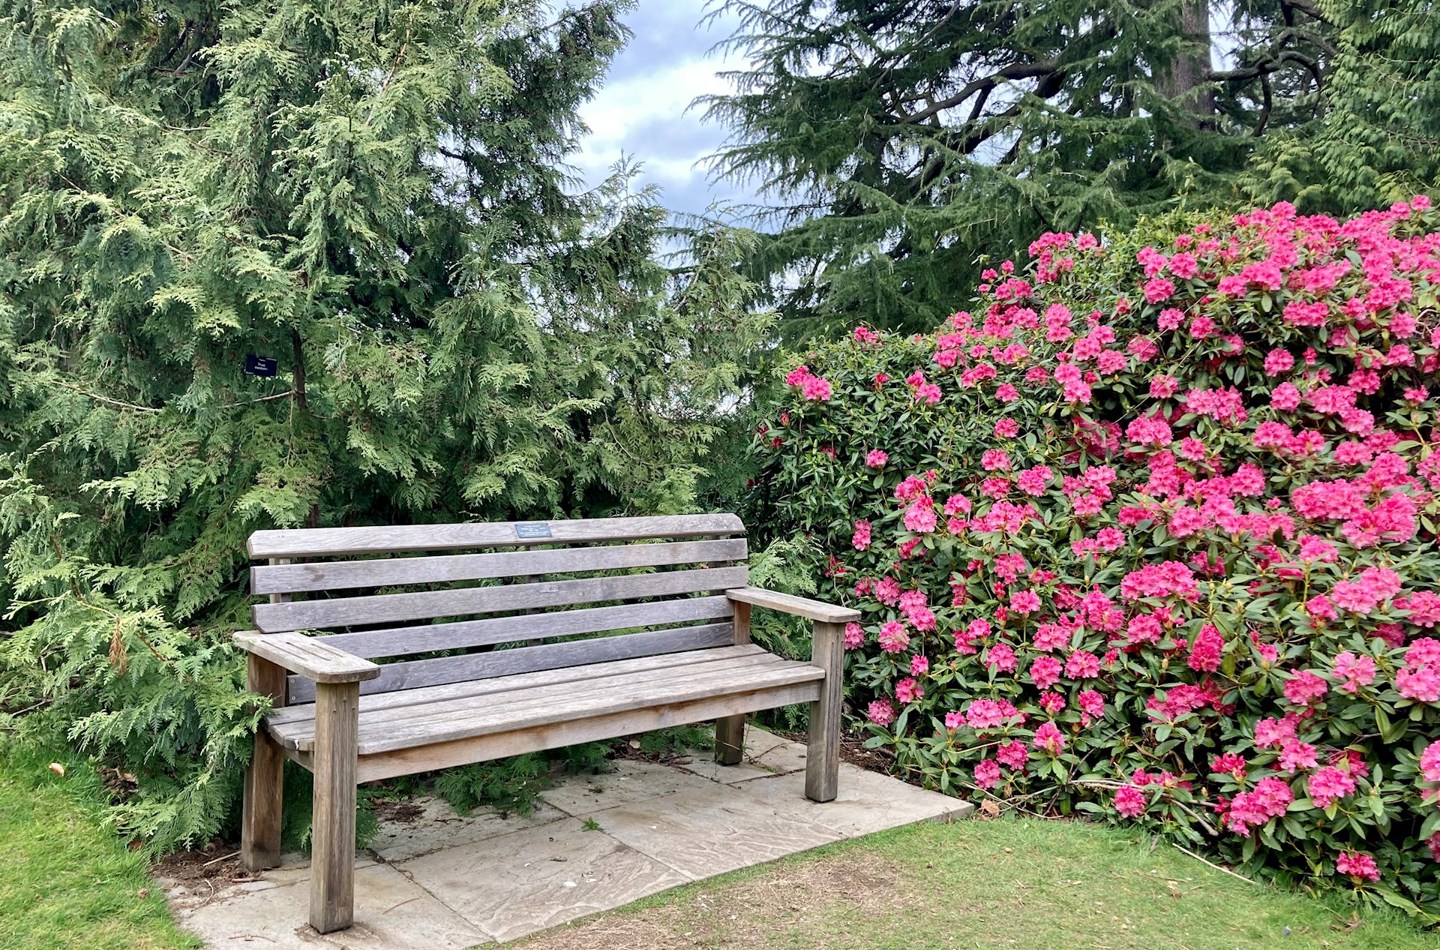 Commemorative Bench next to Rhododendrons